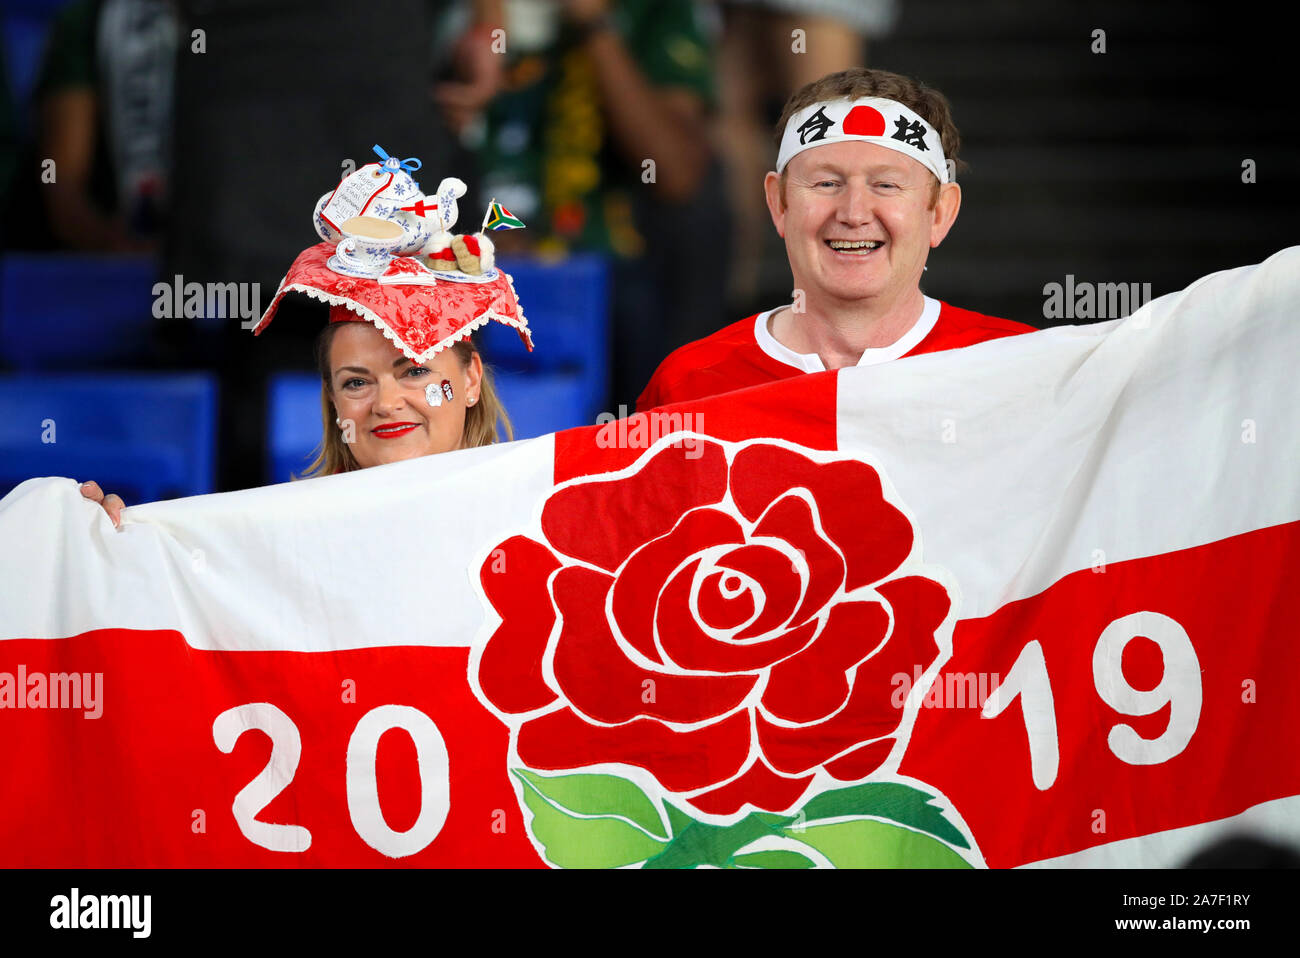 England fans show their support in the stands ahead of the 2019 Rugby World Cup final match at Yokohama Stadium. Stock Photo